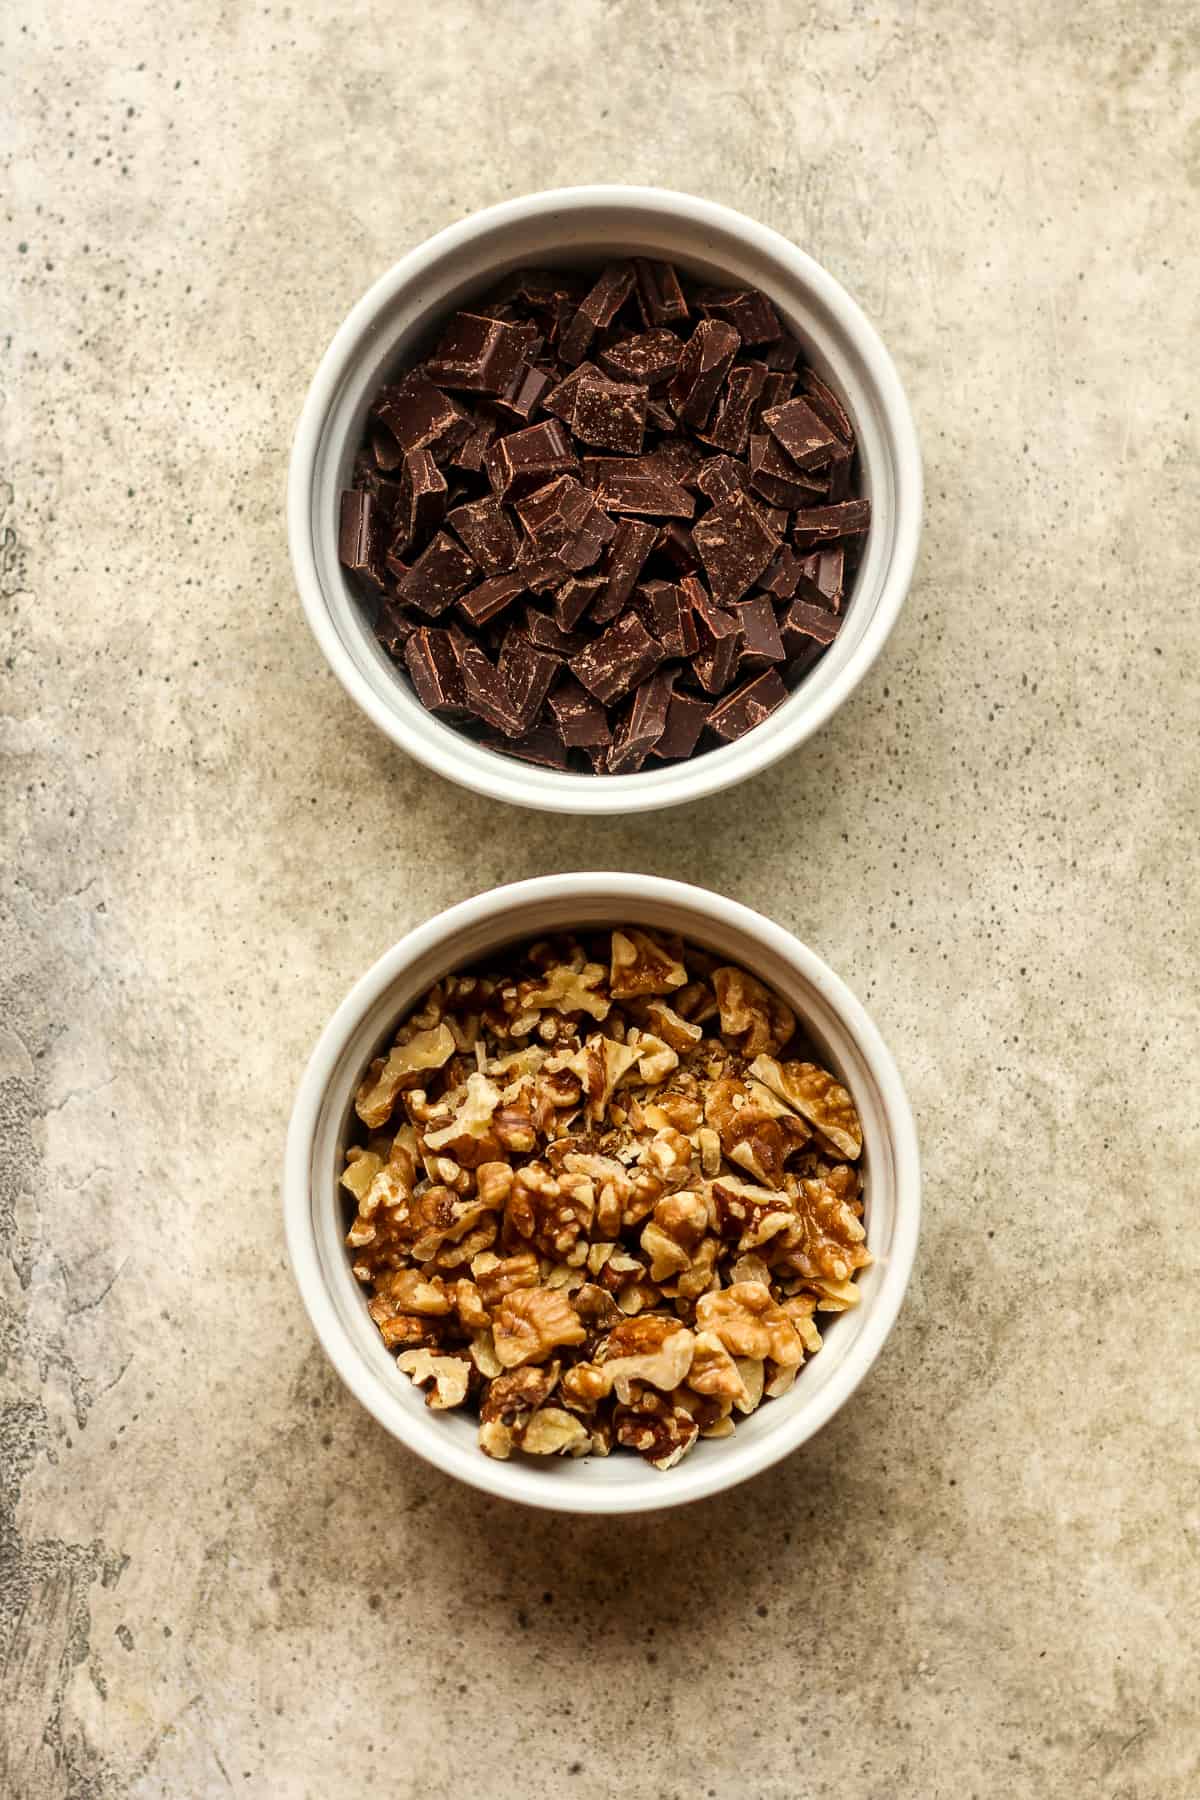 A bowl of chopped chocolate and a bowl of chopped walnuts.